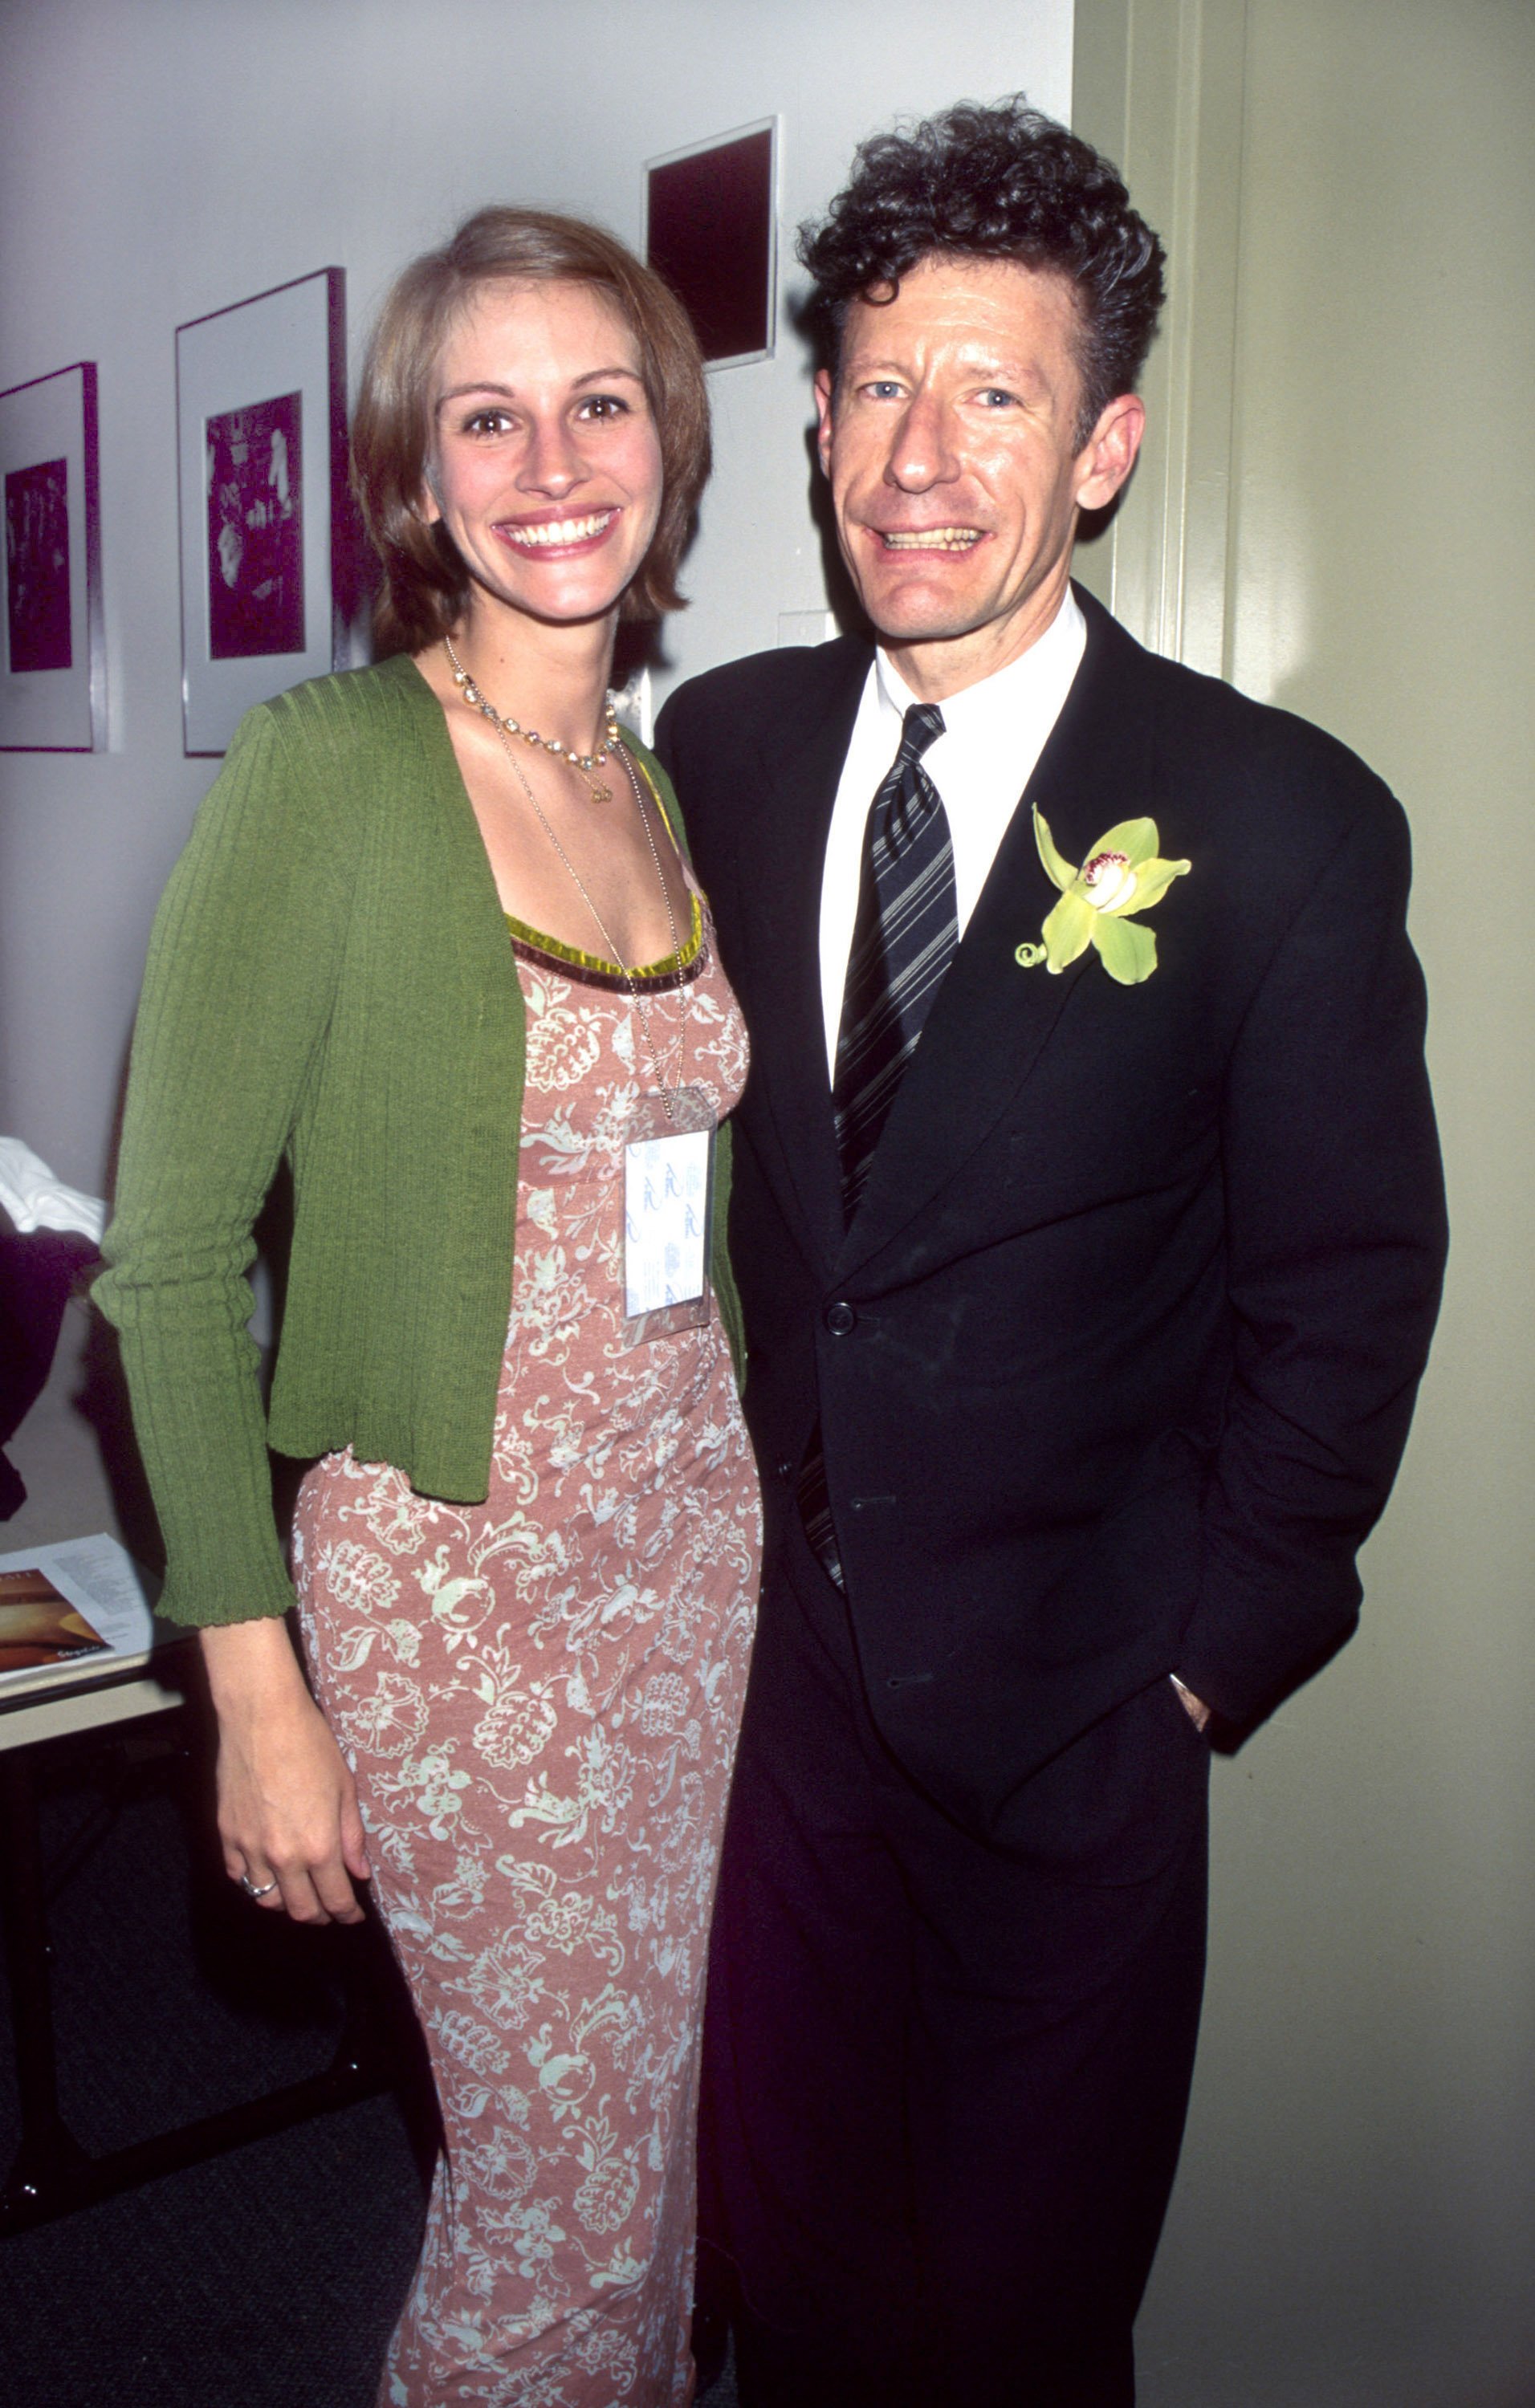 Lyle Lovett and Julia Roberts during the Rainforest Foundation Benefit Concert at the Carnegie Hall on April 30, 1997 in New York, New York. / Source: Getty Images